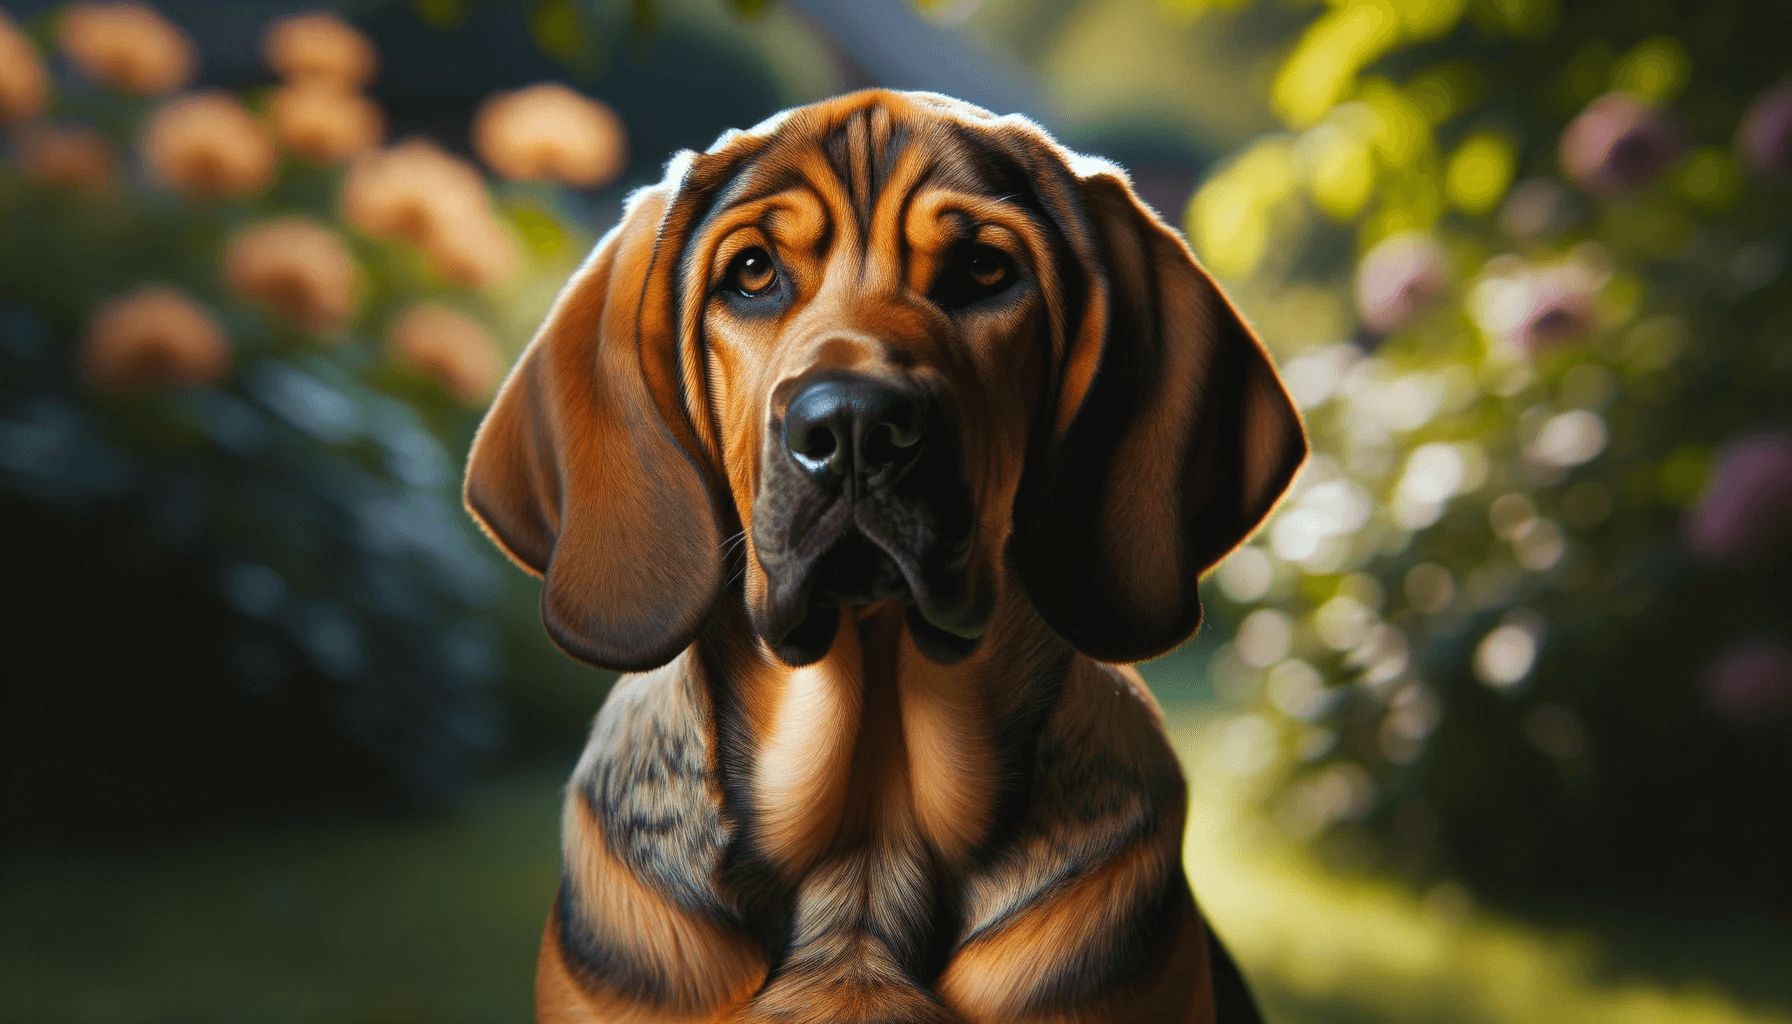 A bloodhound lab mix flaunting its unique coat color, a blend between its Labrador and Bloodhound parents